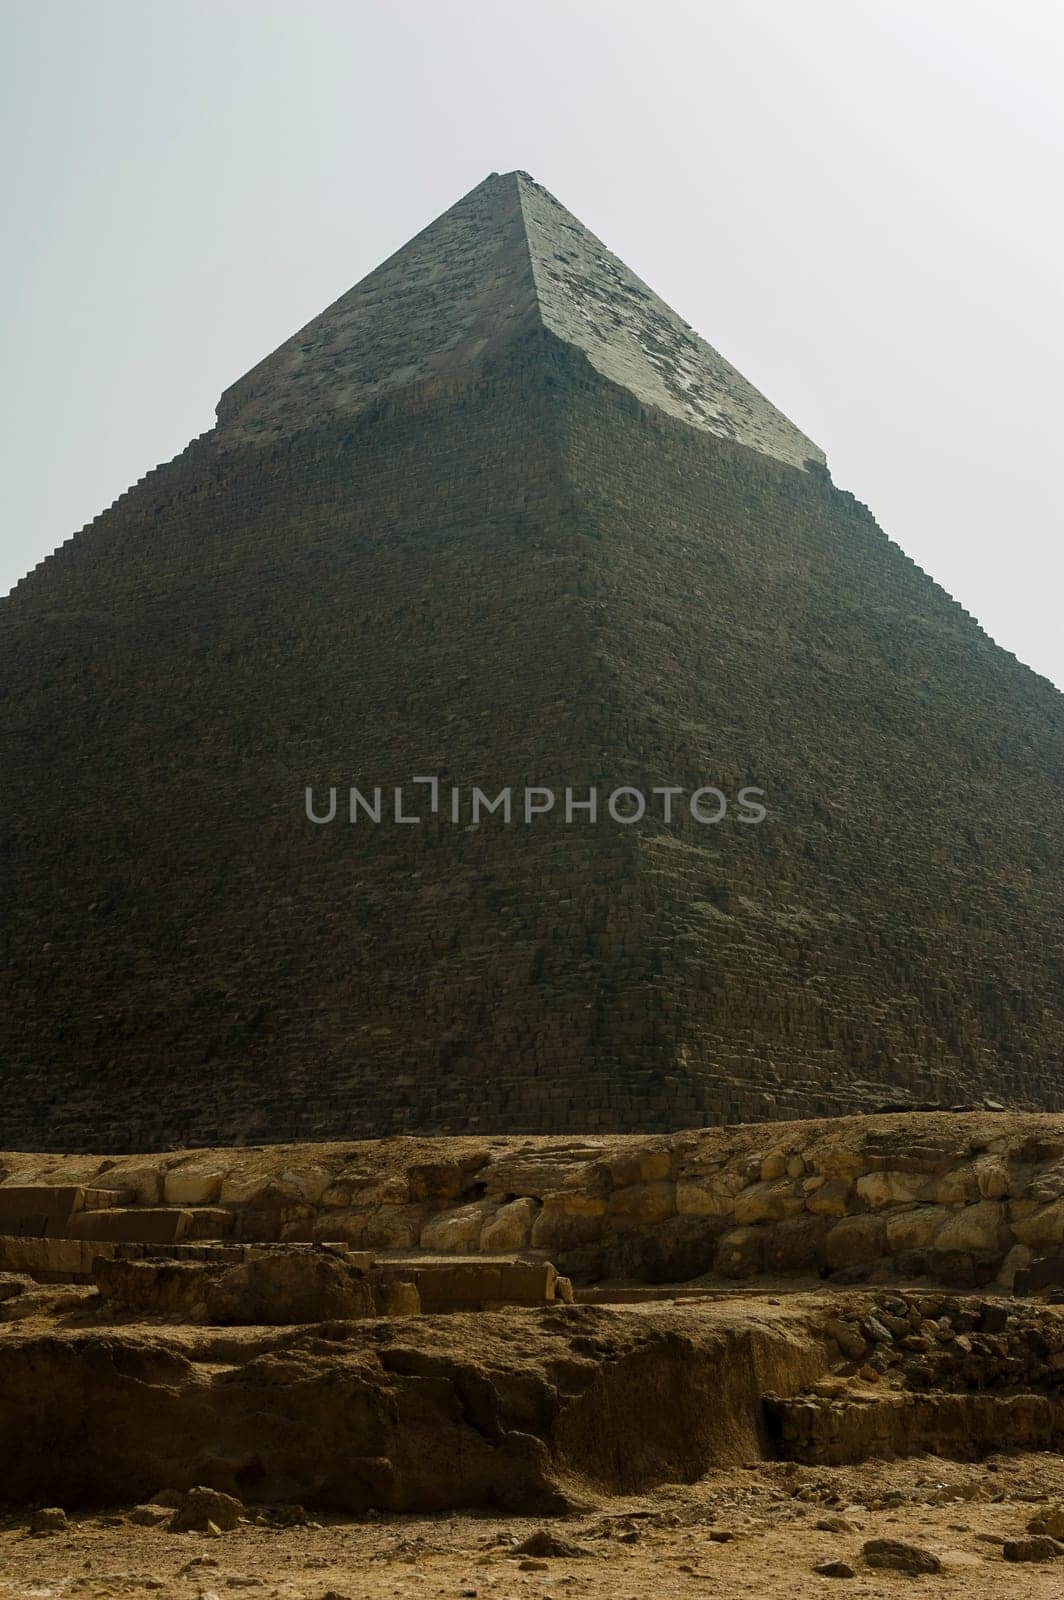 The Pyramid of Khafre by Giamplume